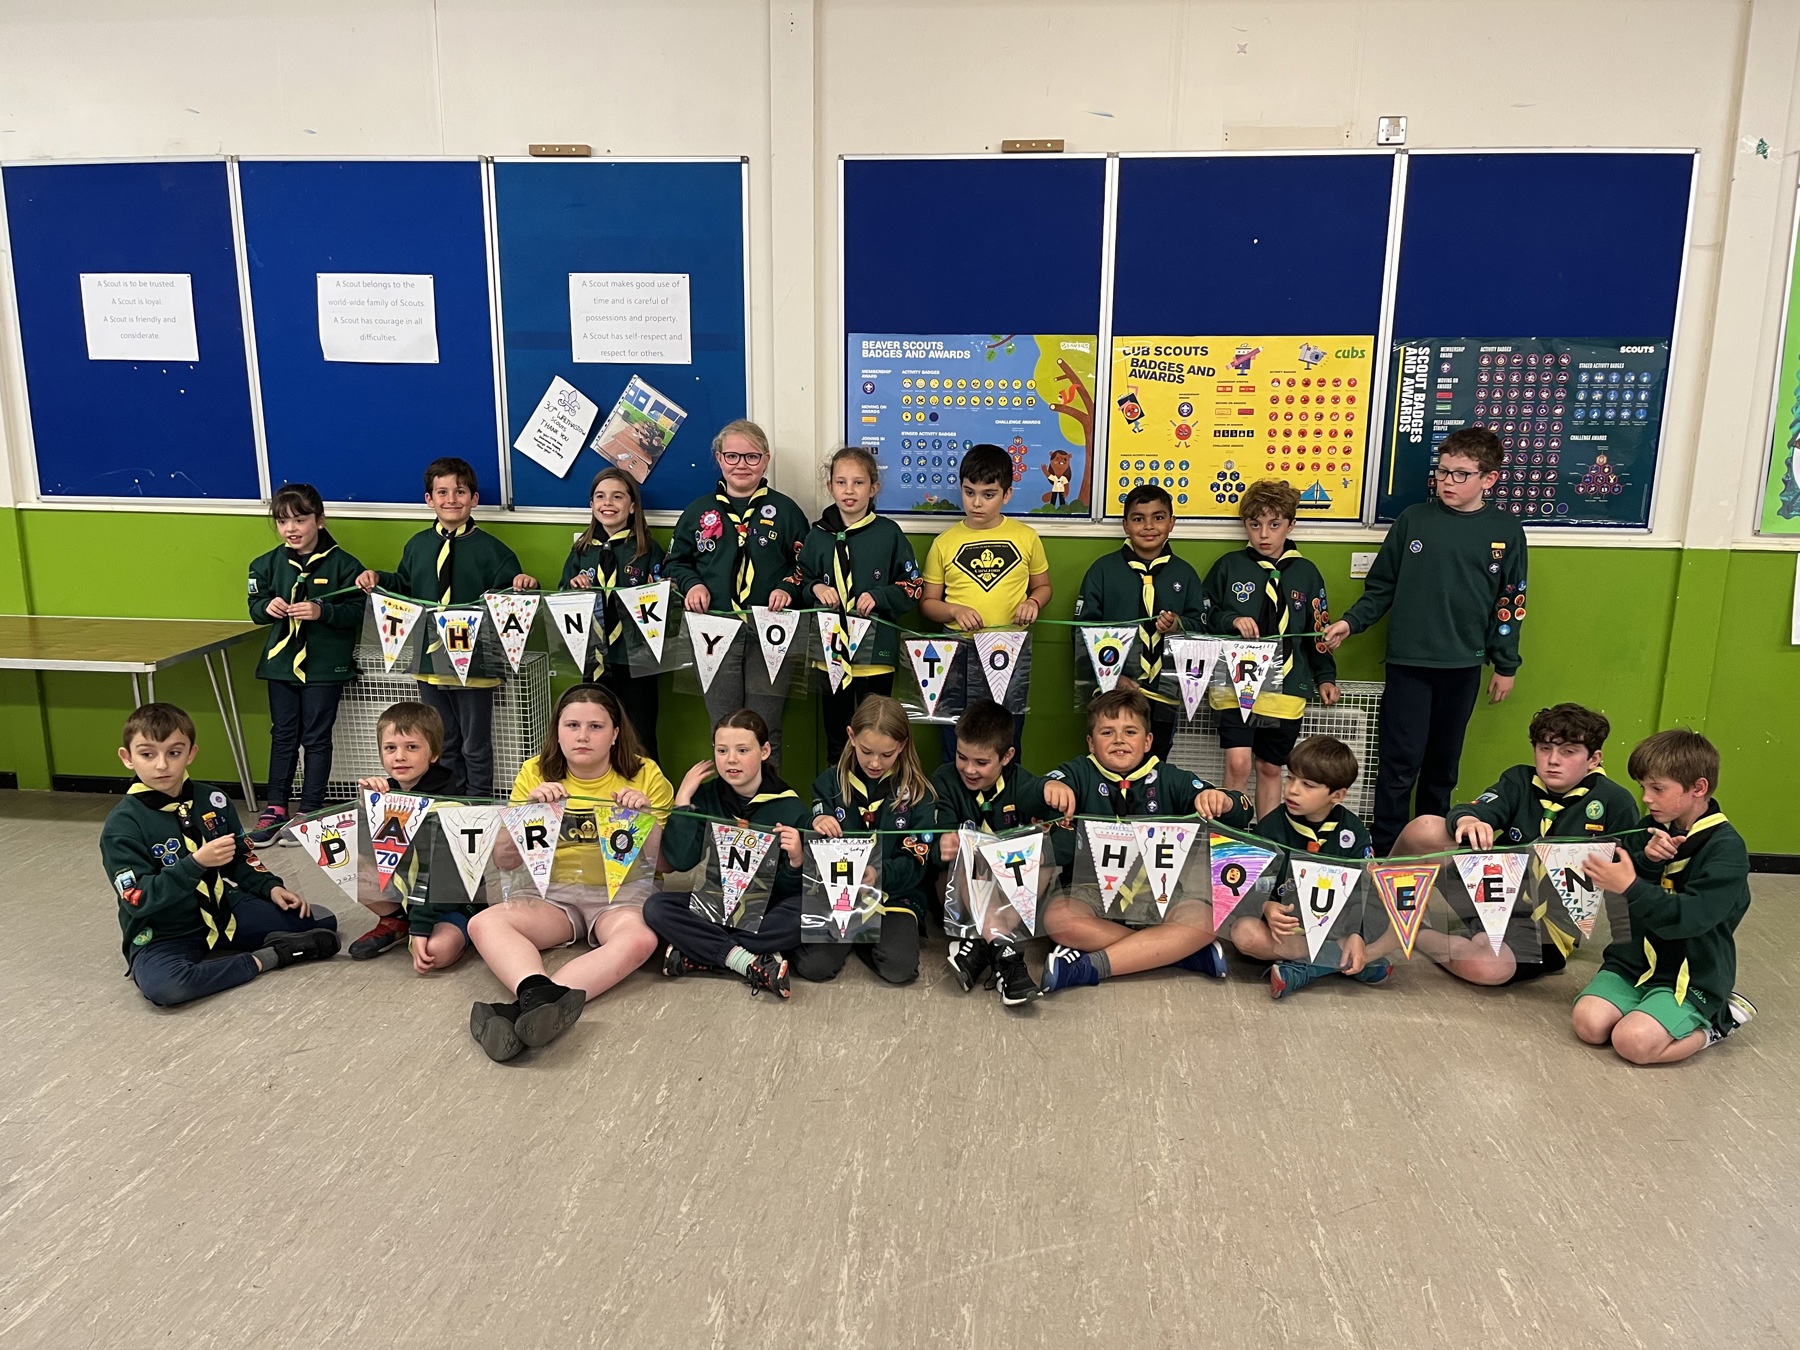 Cub Scouts gathered together holding bunting they've made for the Jubilee and Thank You Day